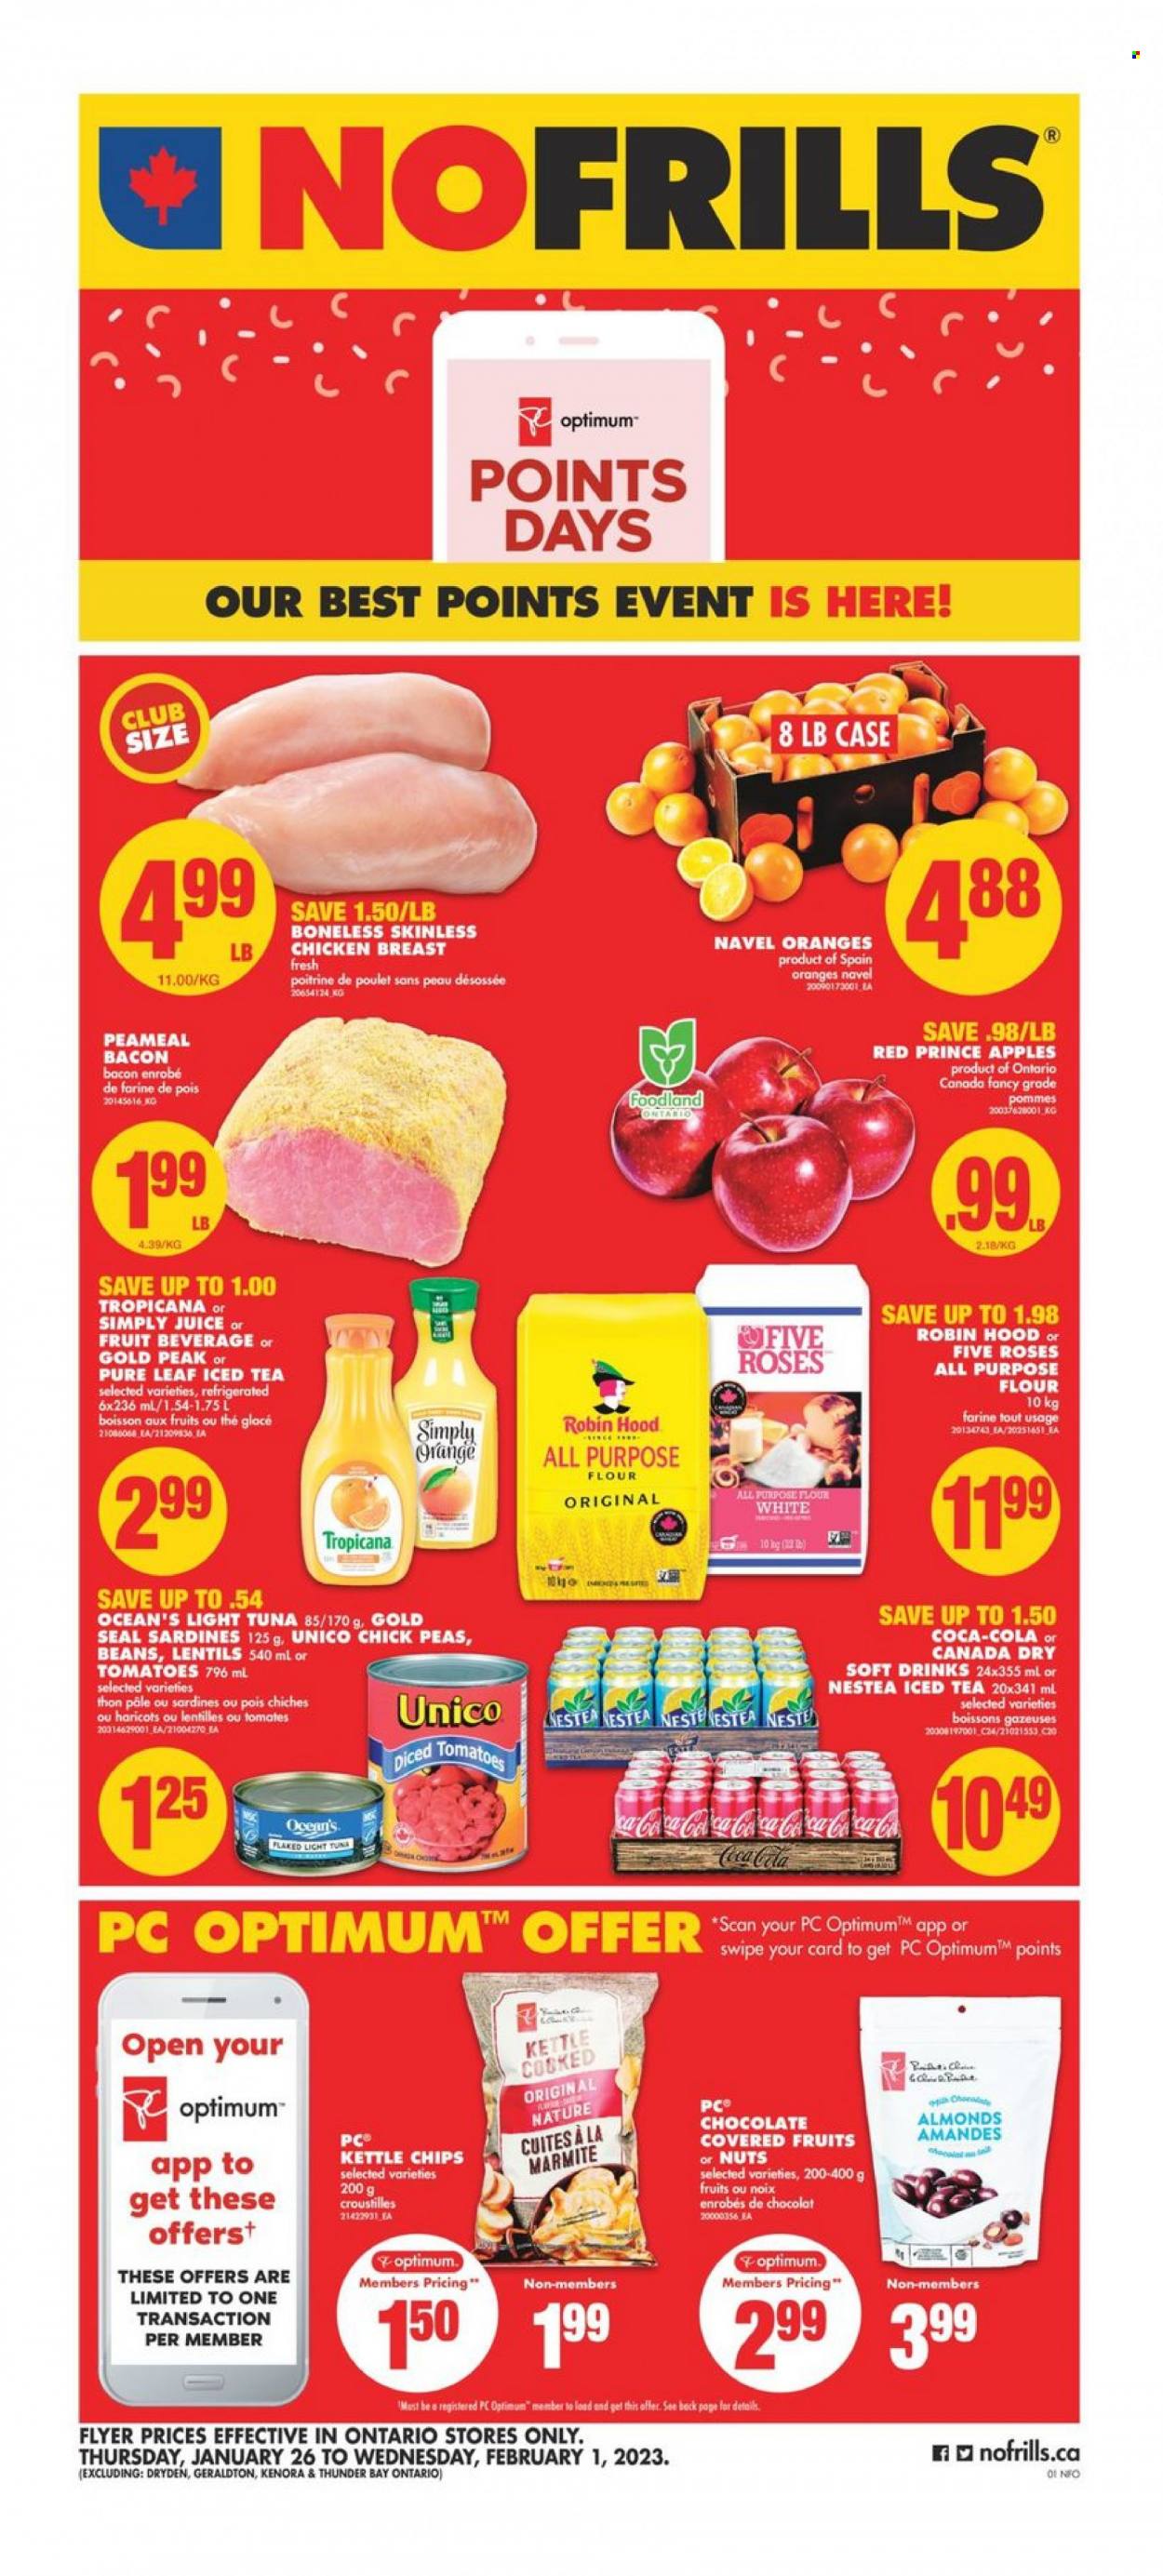 No Frills Flyer - January 26, 2023 - February 01, 2023 - Sales products - chair, tomatoes, apples, navel oranges, sardines, tuna, bacon, chips, kettle, all purpose flour, flour, lentils, light tuna, diced tomatoes, almonds, nuts, Canada Dry, Coca-Cola, juice, ice tea, soft drink, Pure Leaf, chicken breasts, chicken meat, Optimum. Page 1.